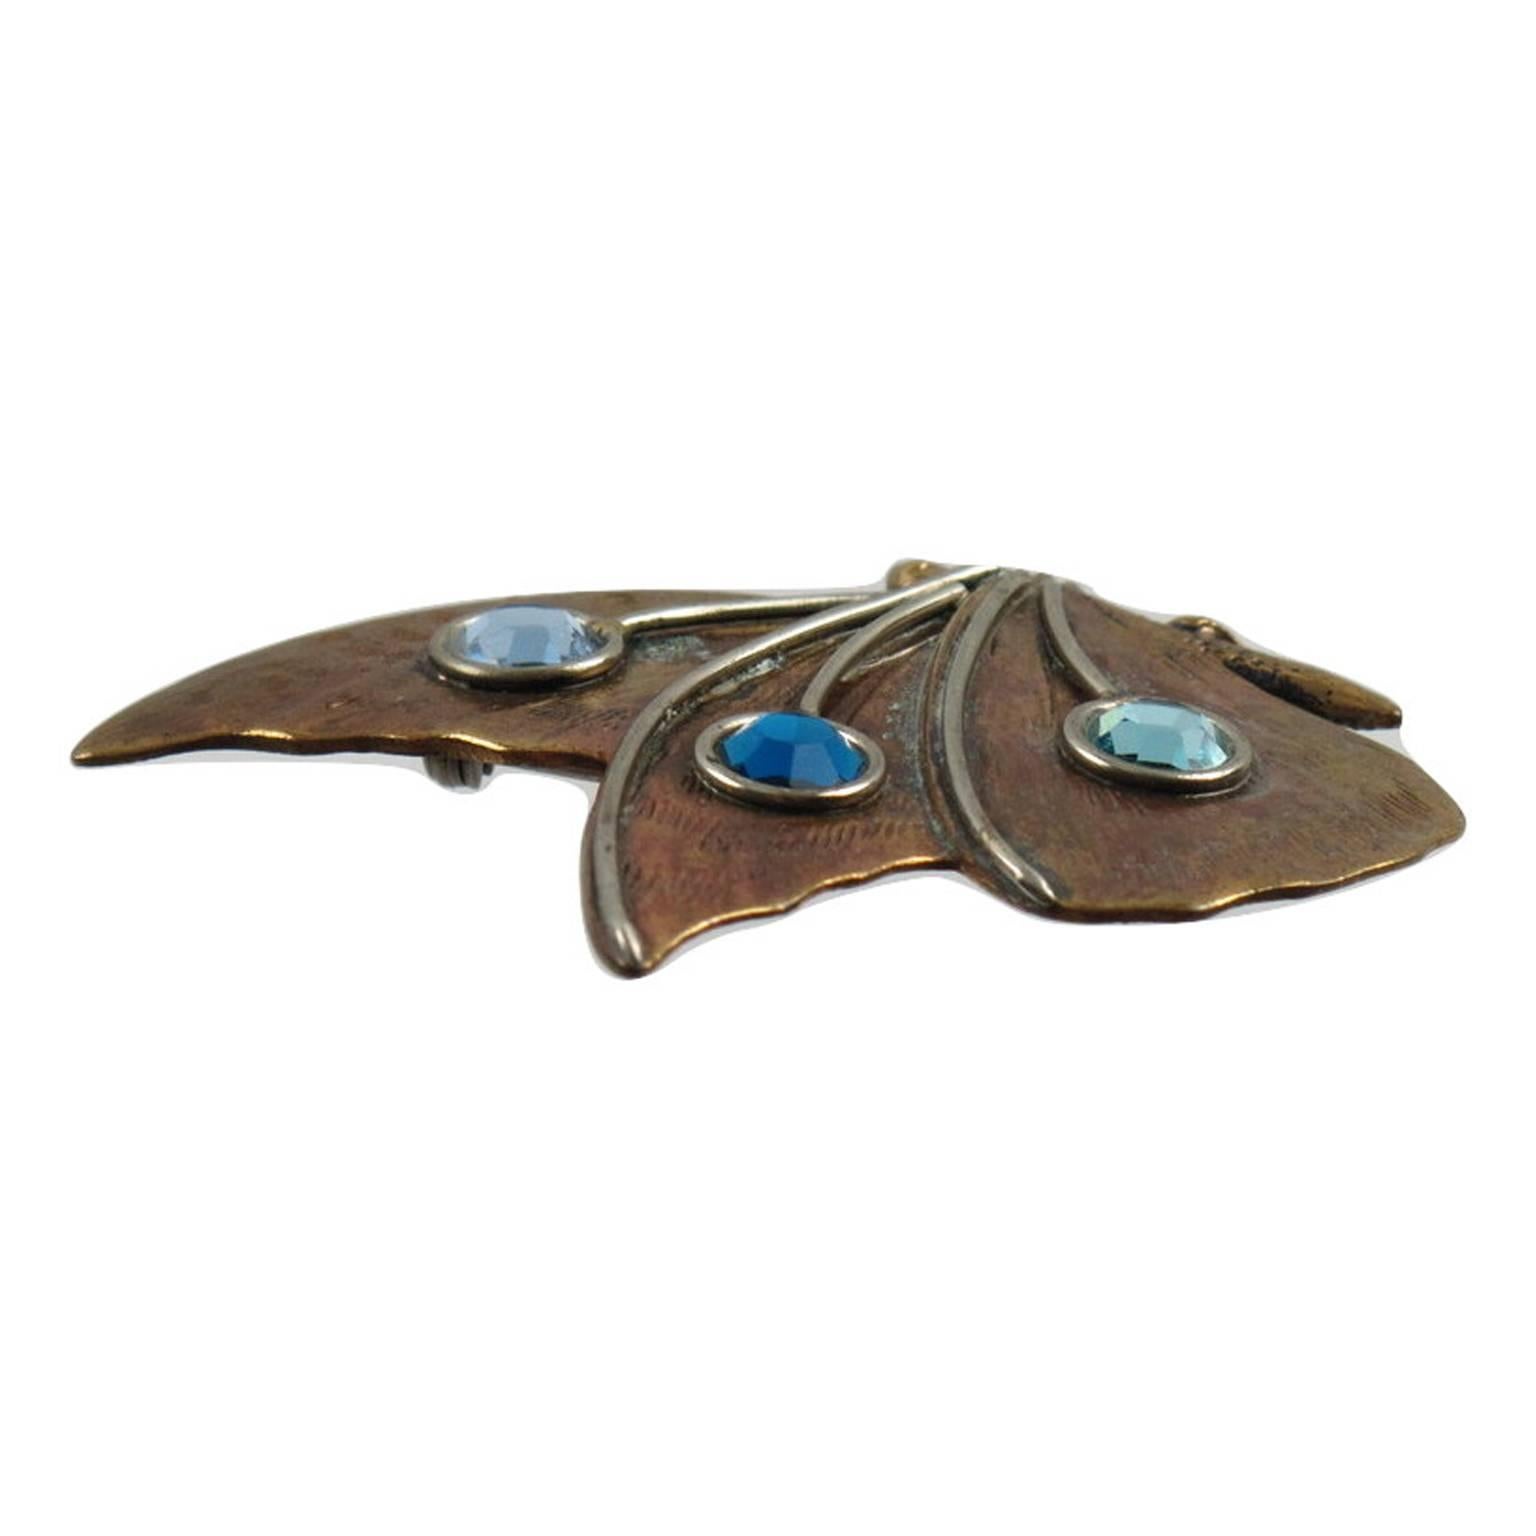 Fabrice Paris Signed Pin Brooch Copper Butterfly with Blue Rhinestone 1